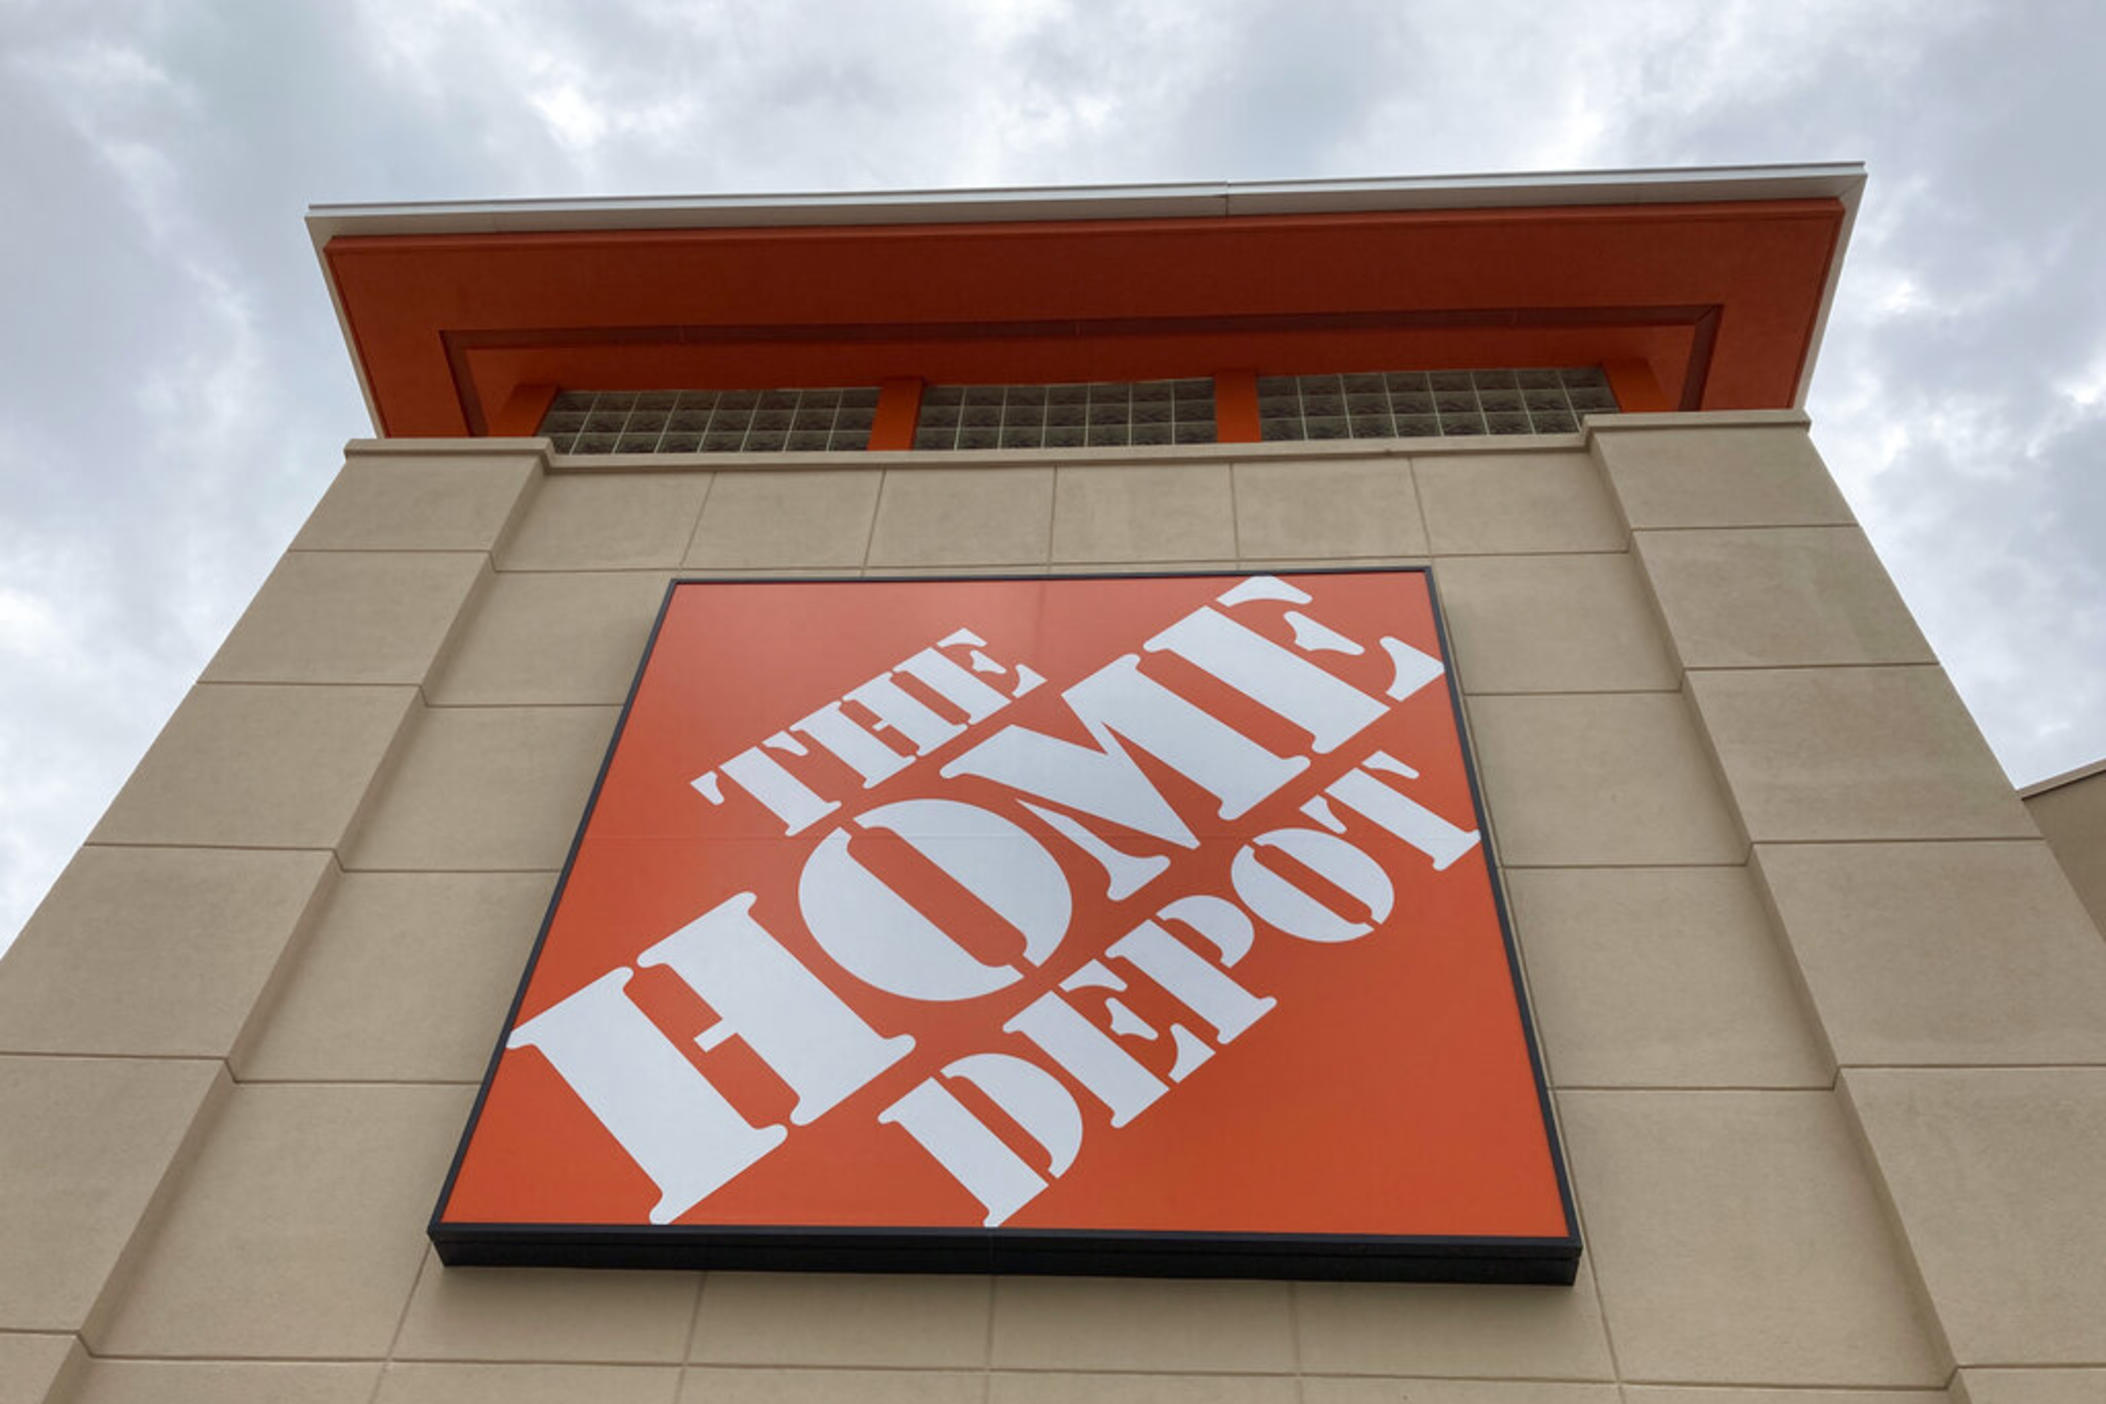 A Home Depot logo sign hands on its facade, Friday, May 14, 2021, in North Miami, Fla. Home Depot reports their financial earnings on Tuesday, Feb. 21, 2023.